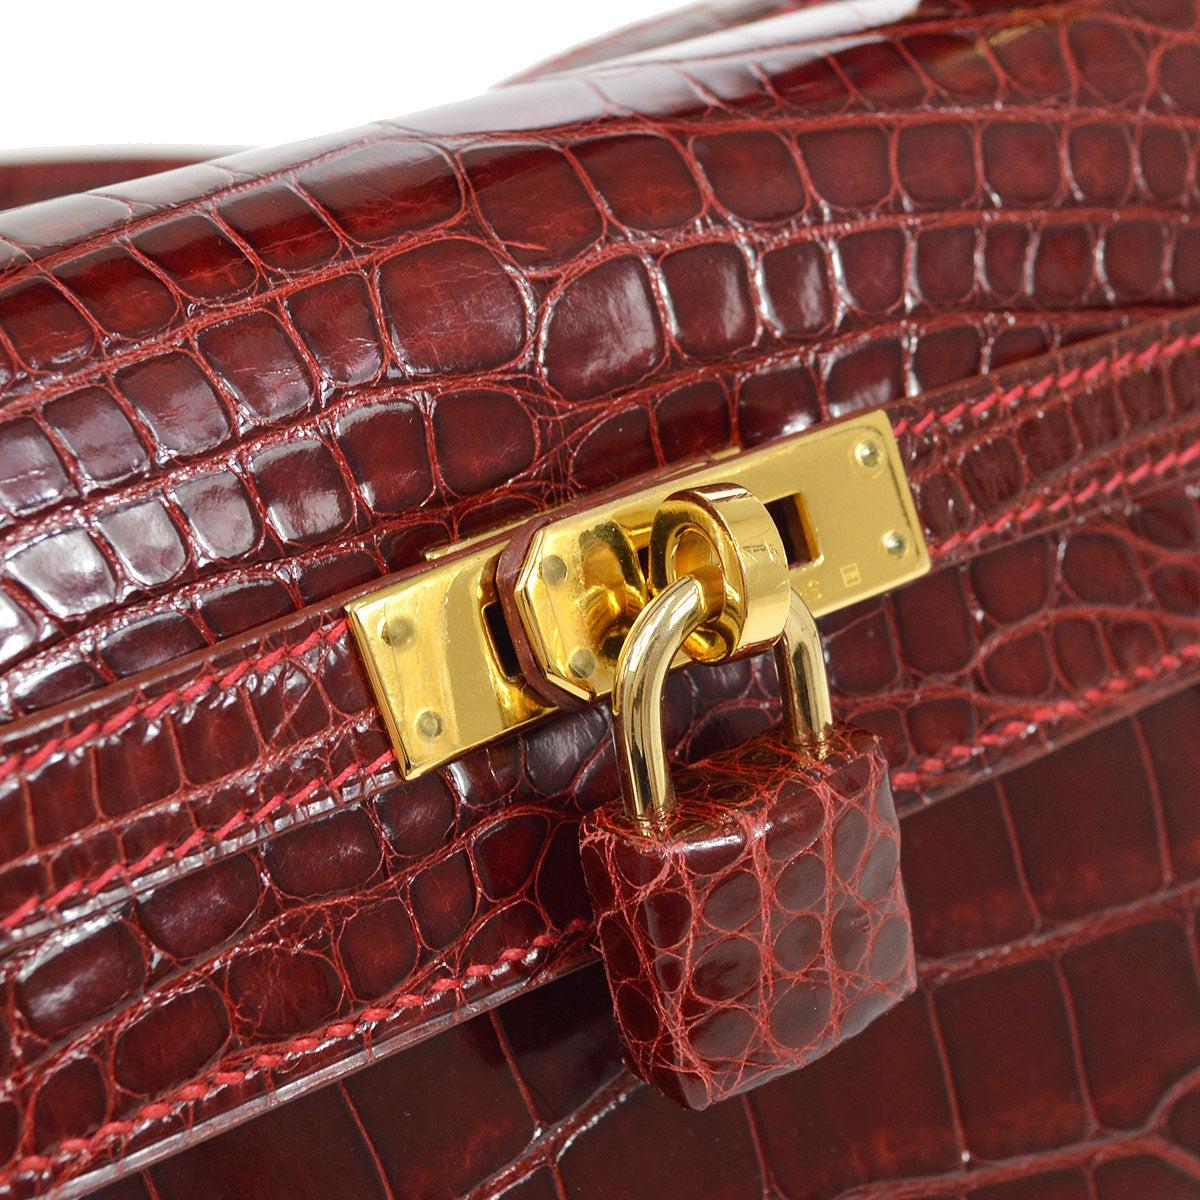 Pre-Owned Vintage Condition
From 2001 Collection
Alligator 
Gold Hardware
Leather Lining
Measures 9.75